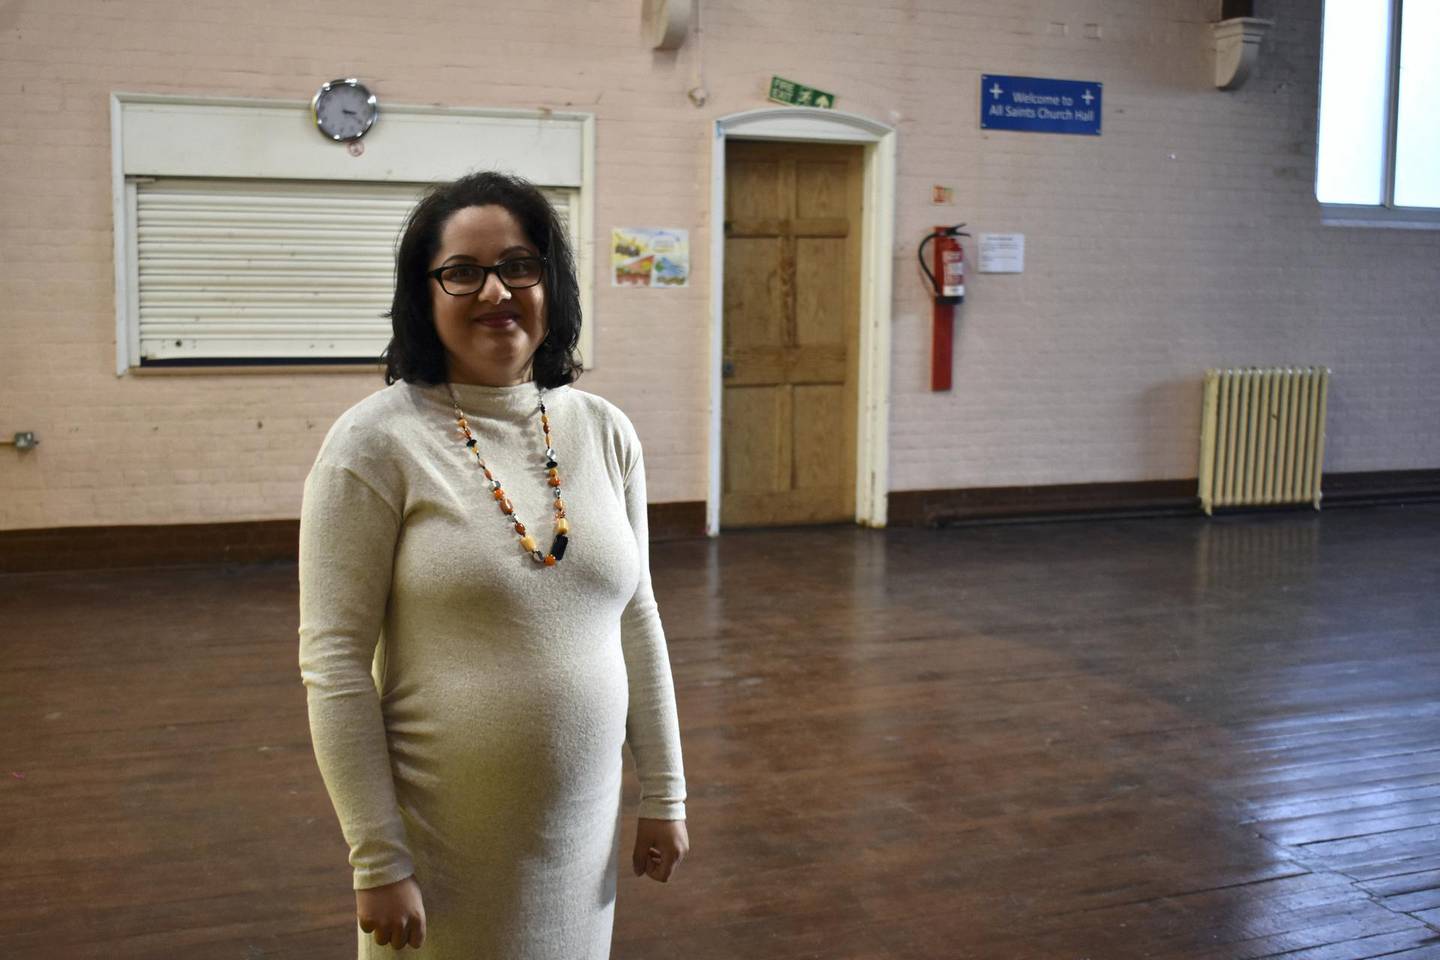 Crina Morteanu, project manager at Luton Roma Trust. Claire Corkery / The National